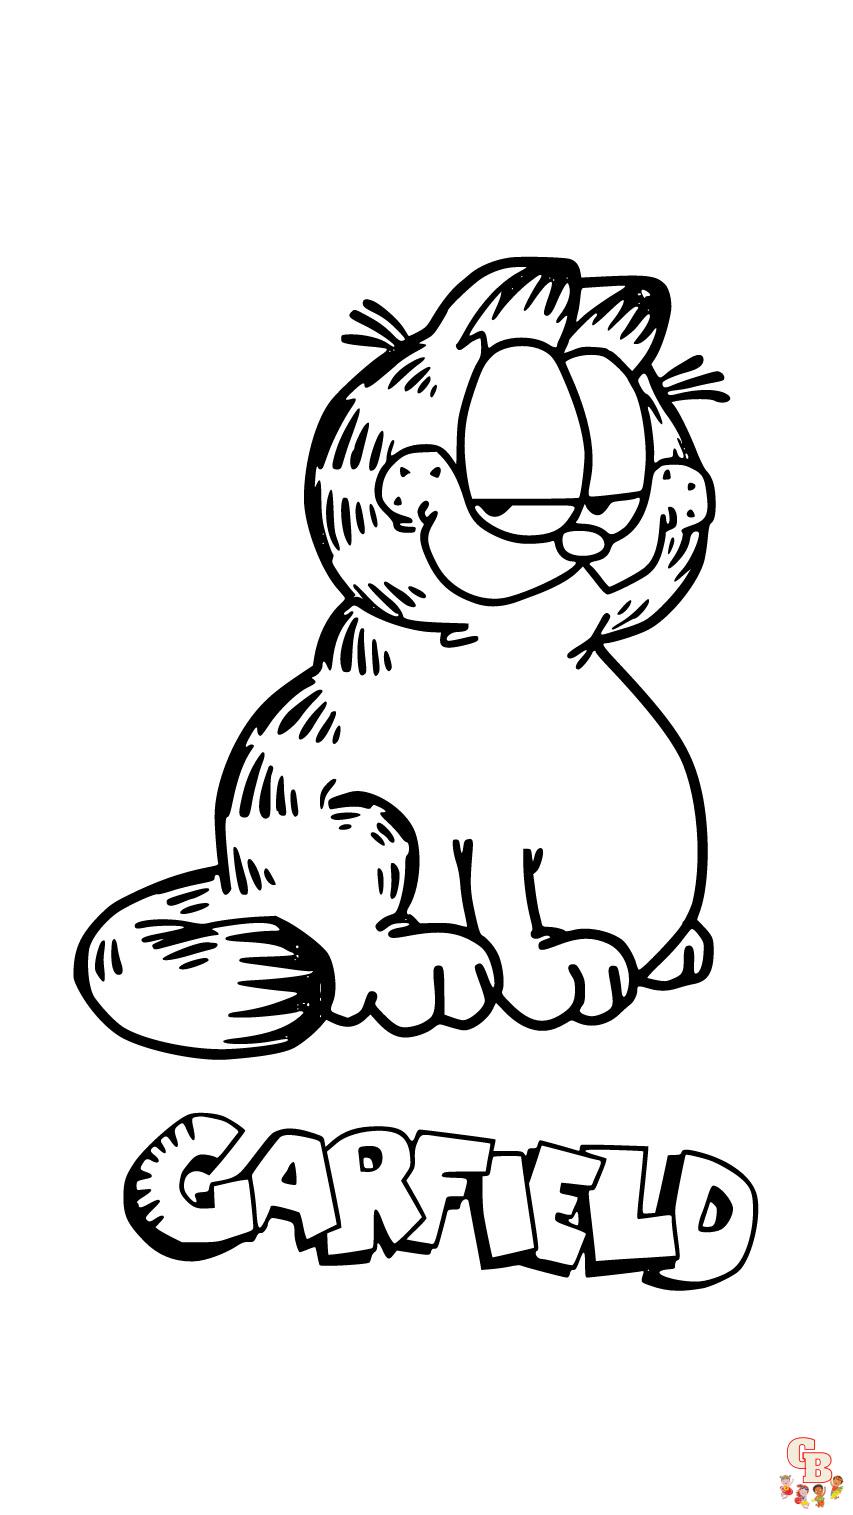 http://gbcoloring.com/wp-content/uploads/2023/06/garfield-coloring-pages.jpg